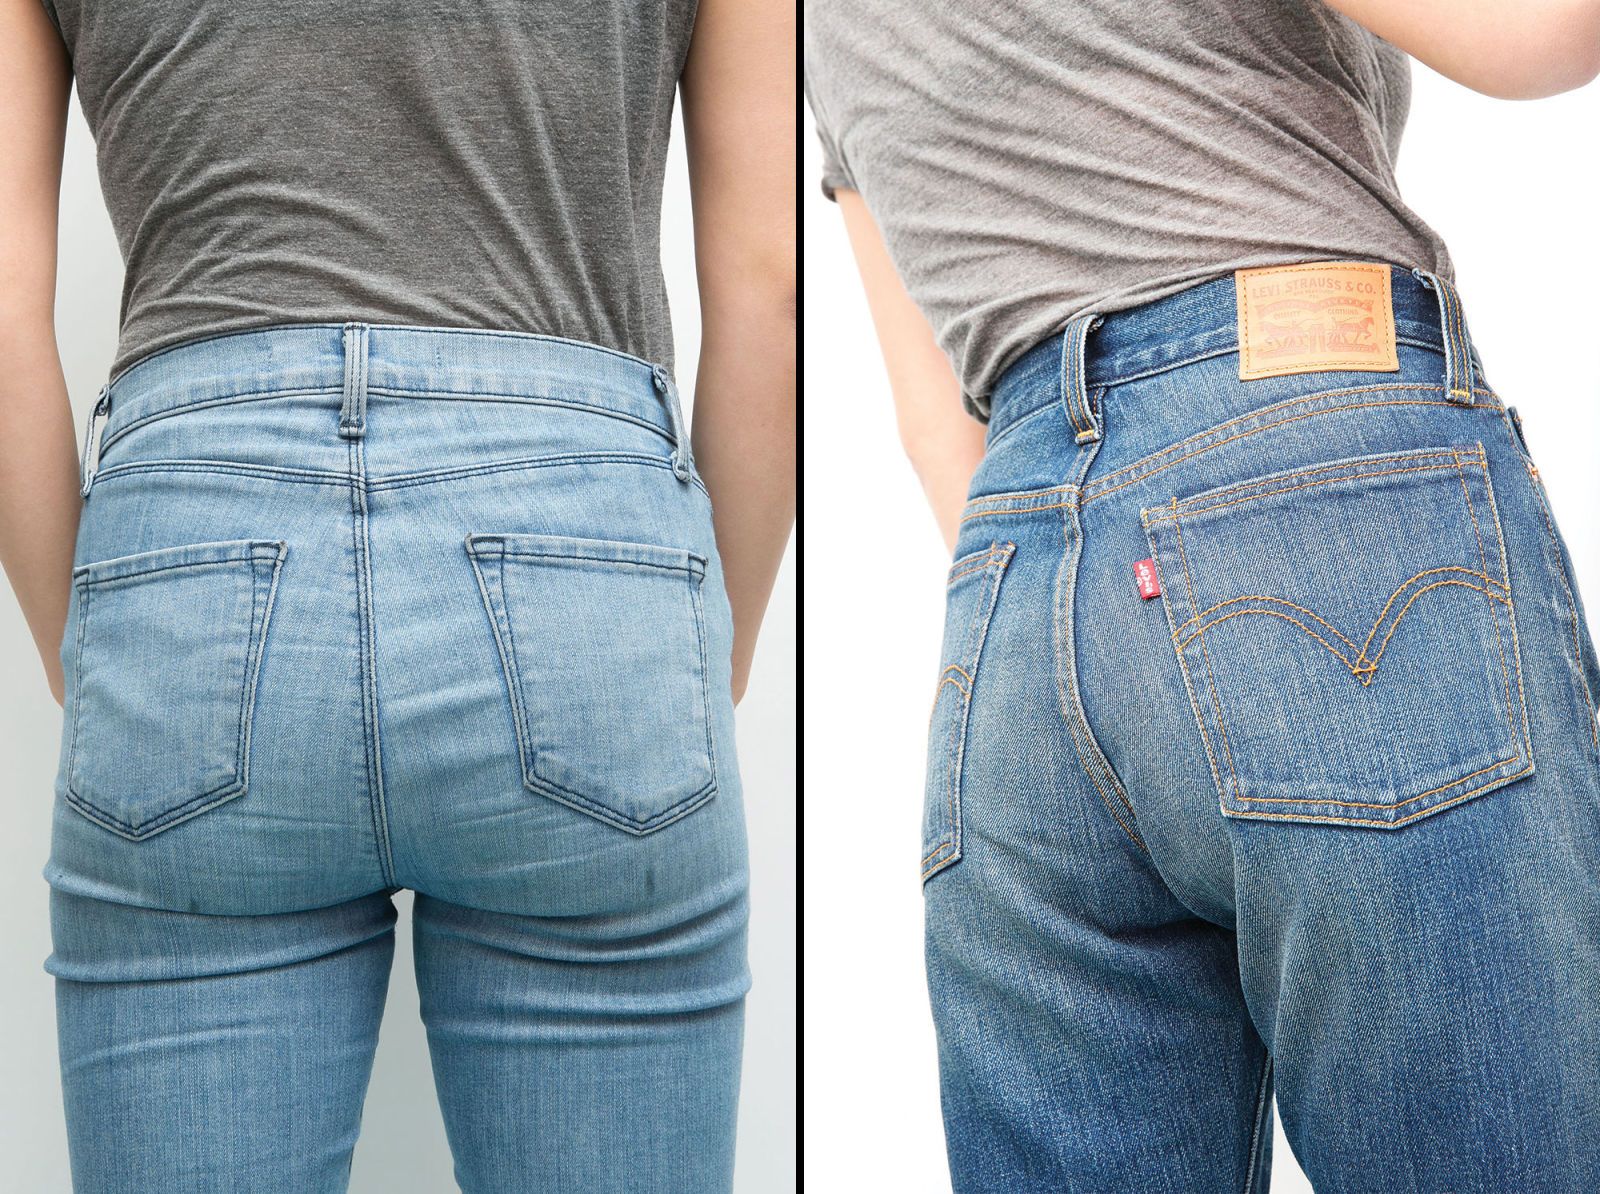 the wedgie jean